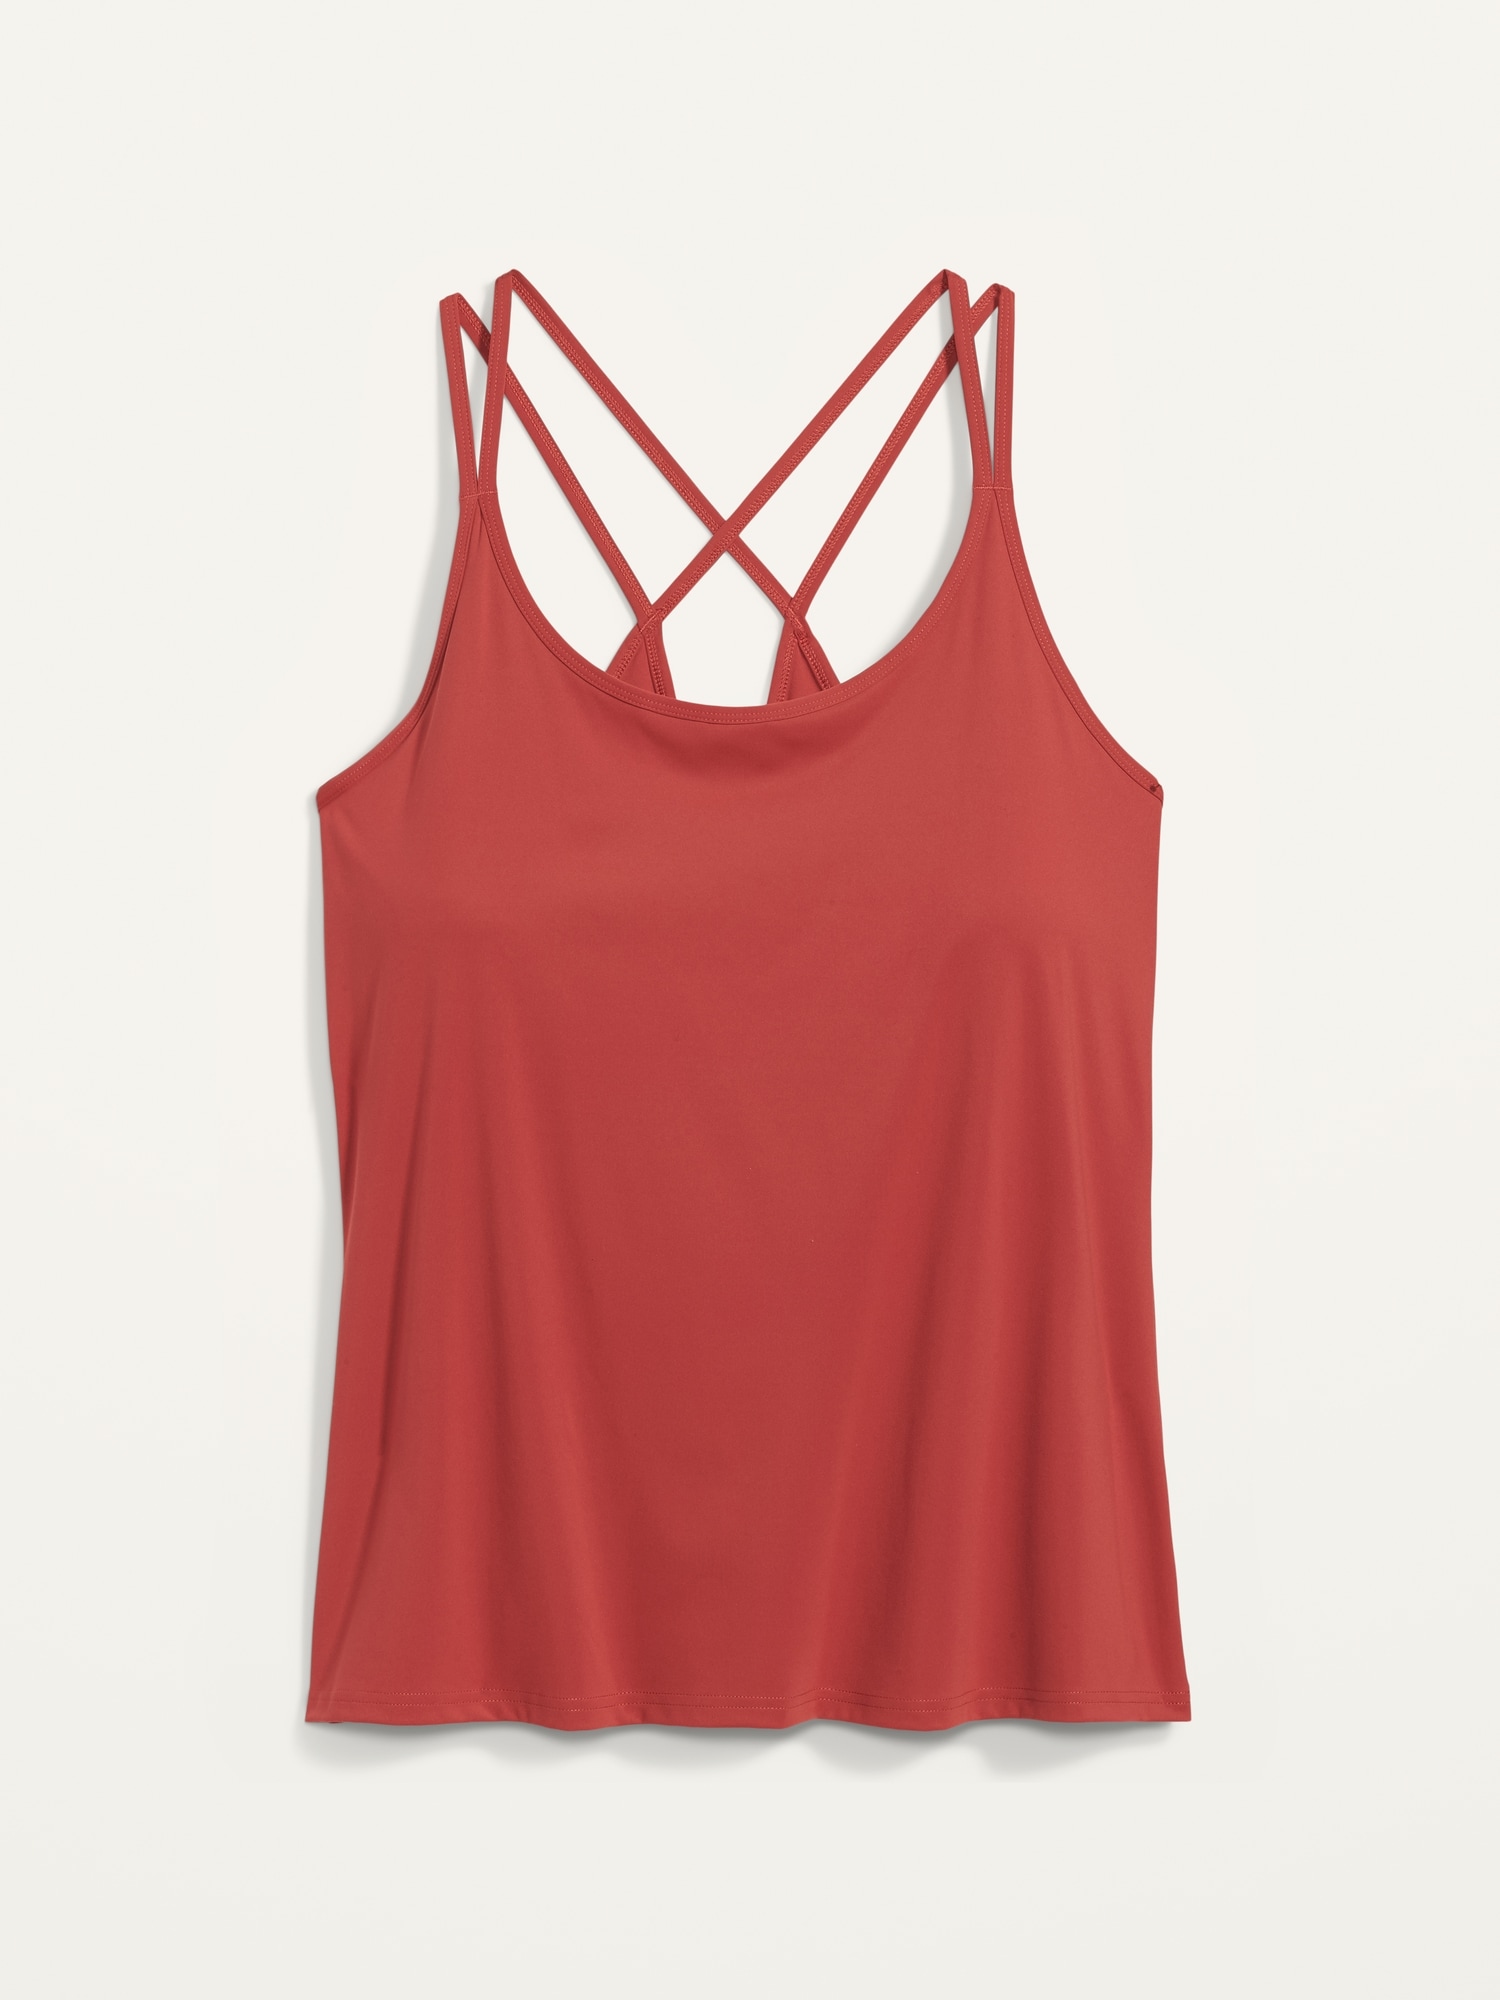 Plus Model Magazine - #PMMFashionFind Strappy Powersoft Shelf-Bra Plus-Size  Tank Top Size 1X - 4X Avail in 3 colors CLICK HERE